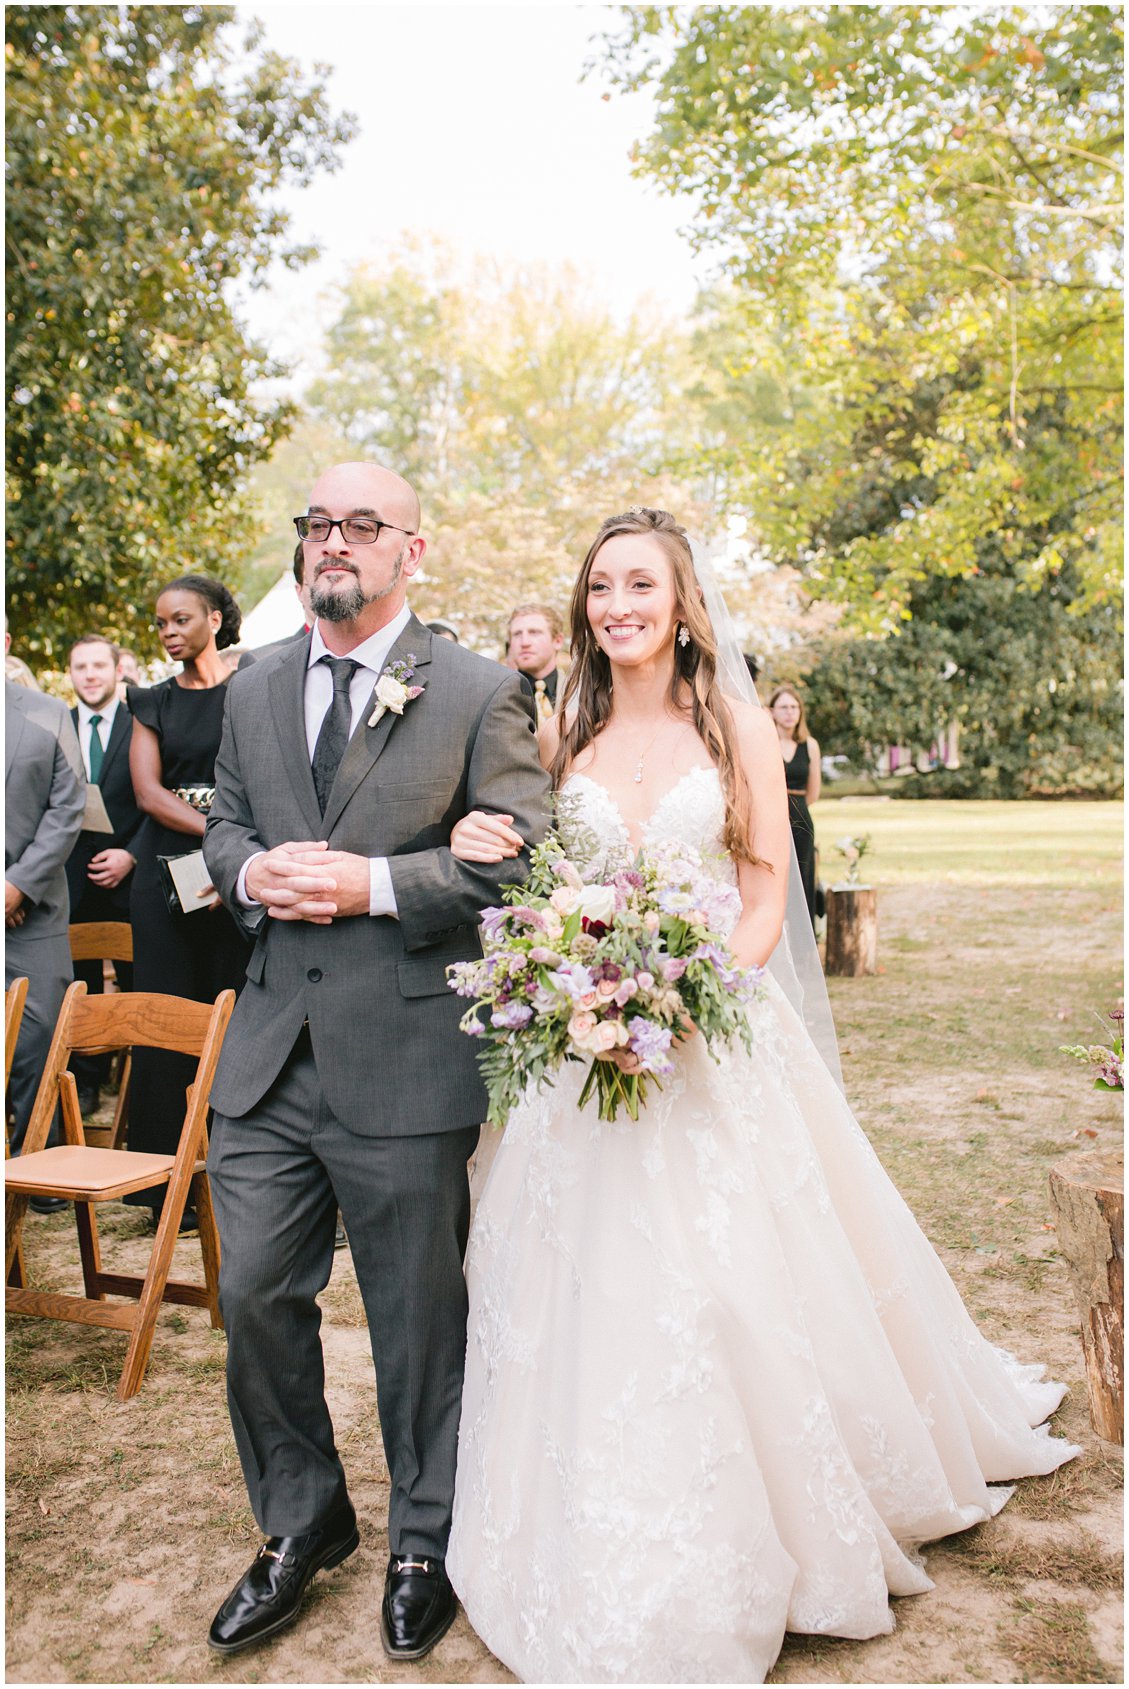 Elegant & intimate outdoor wedding at Seven Springs Farm & Manor Richmond VA captured by Tara & Stephen of Pattengale Photography